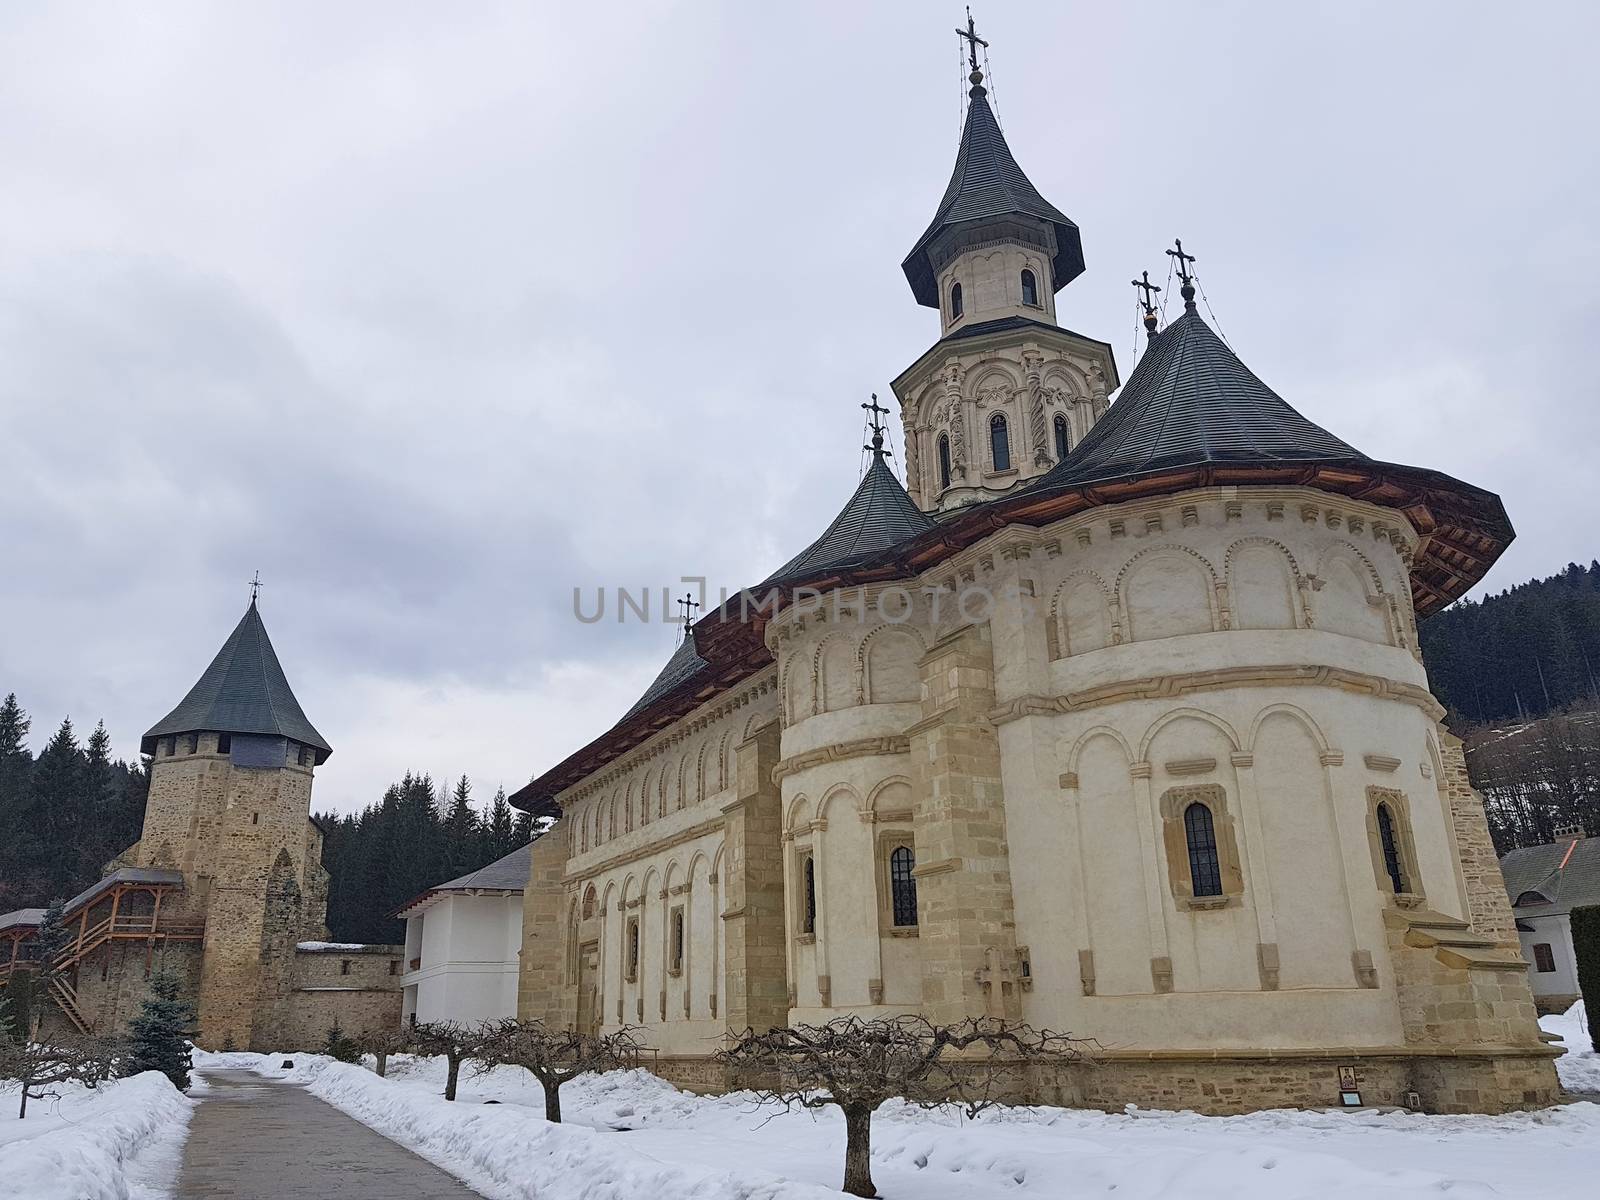 One of the most important romanian monastery, Putna. (Unesco Heritage). The monastery was built and dedicated by Stephen the Great